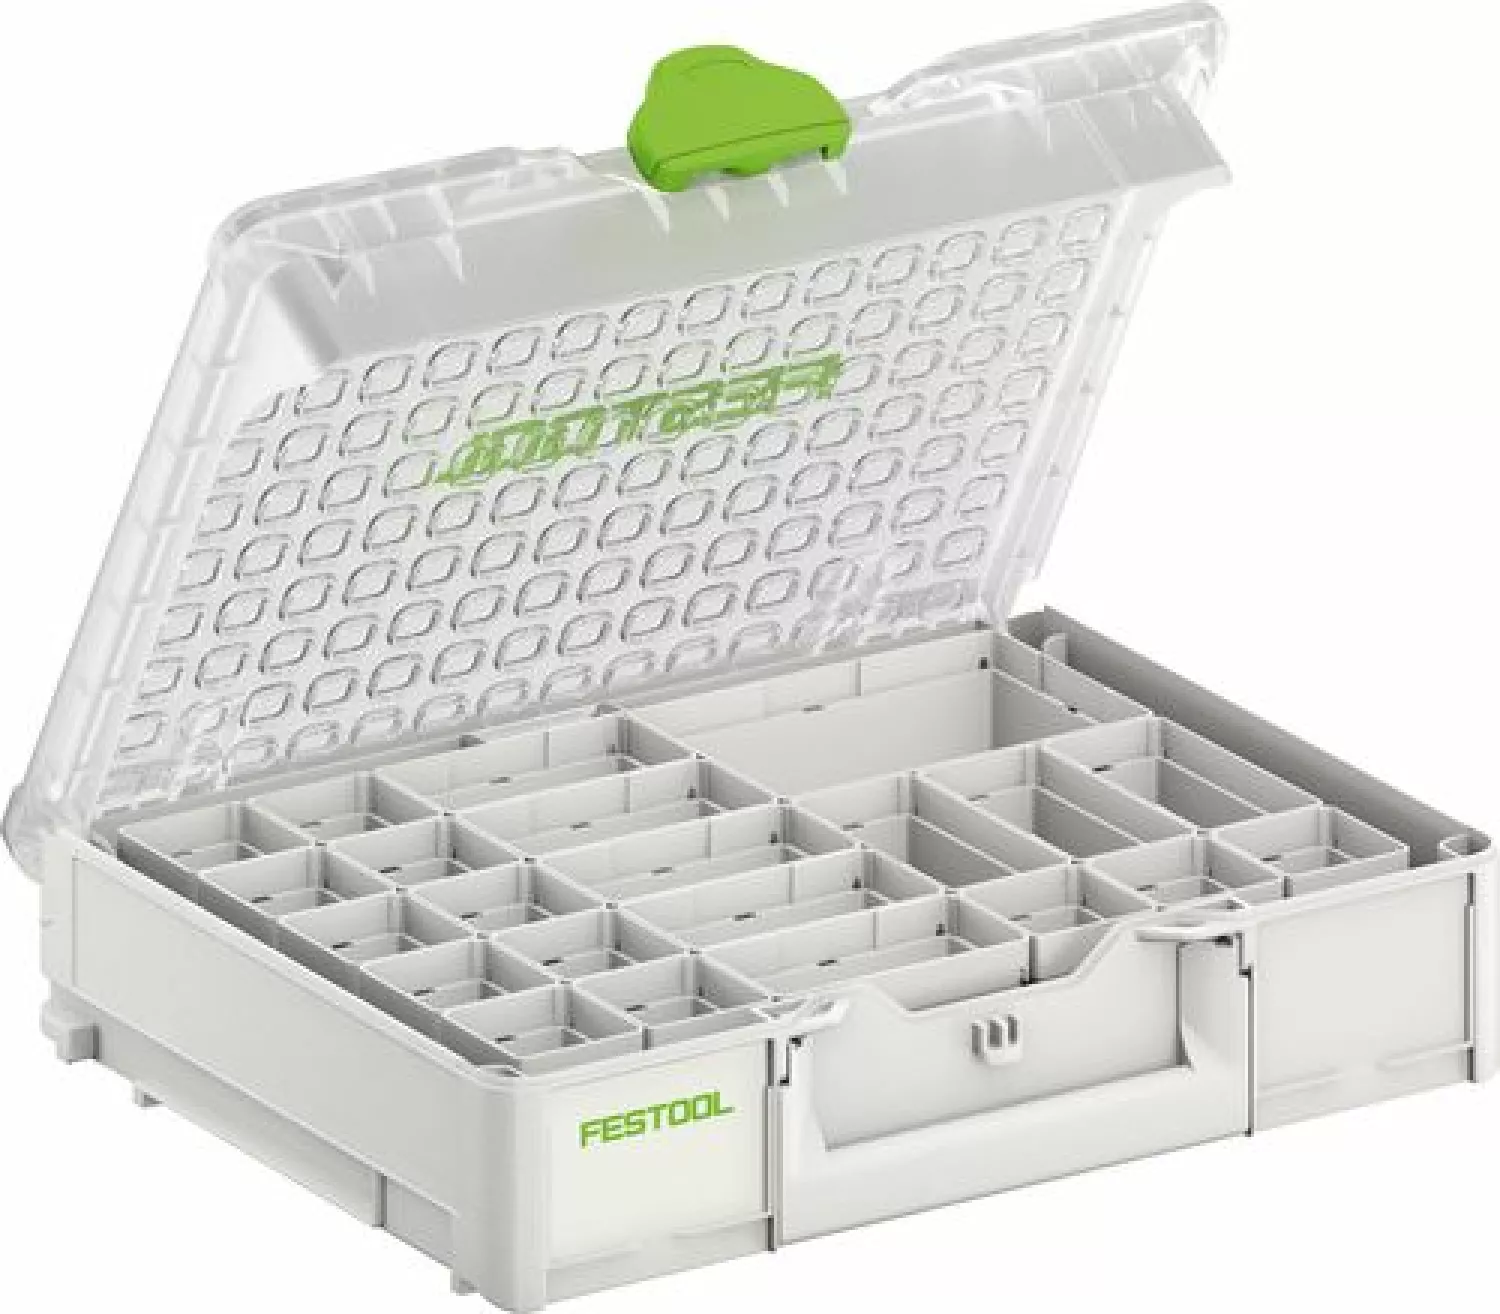 Festool SYS3 ORG M 89 22xESB Systainer³ Organizer - 7,4L-image